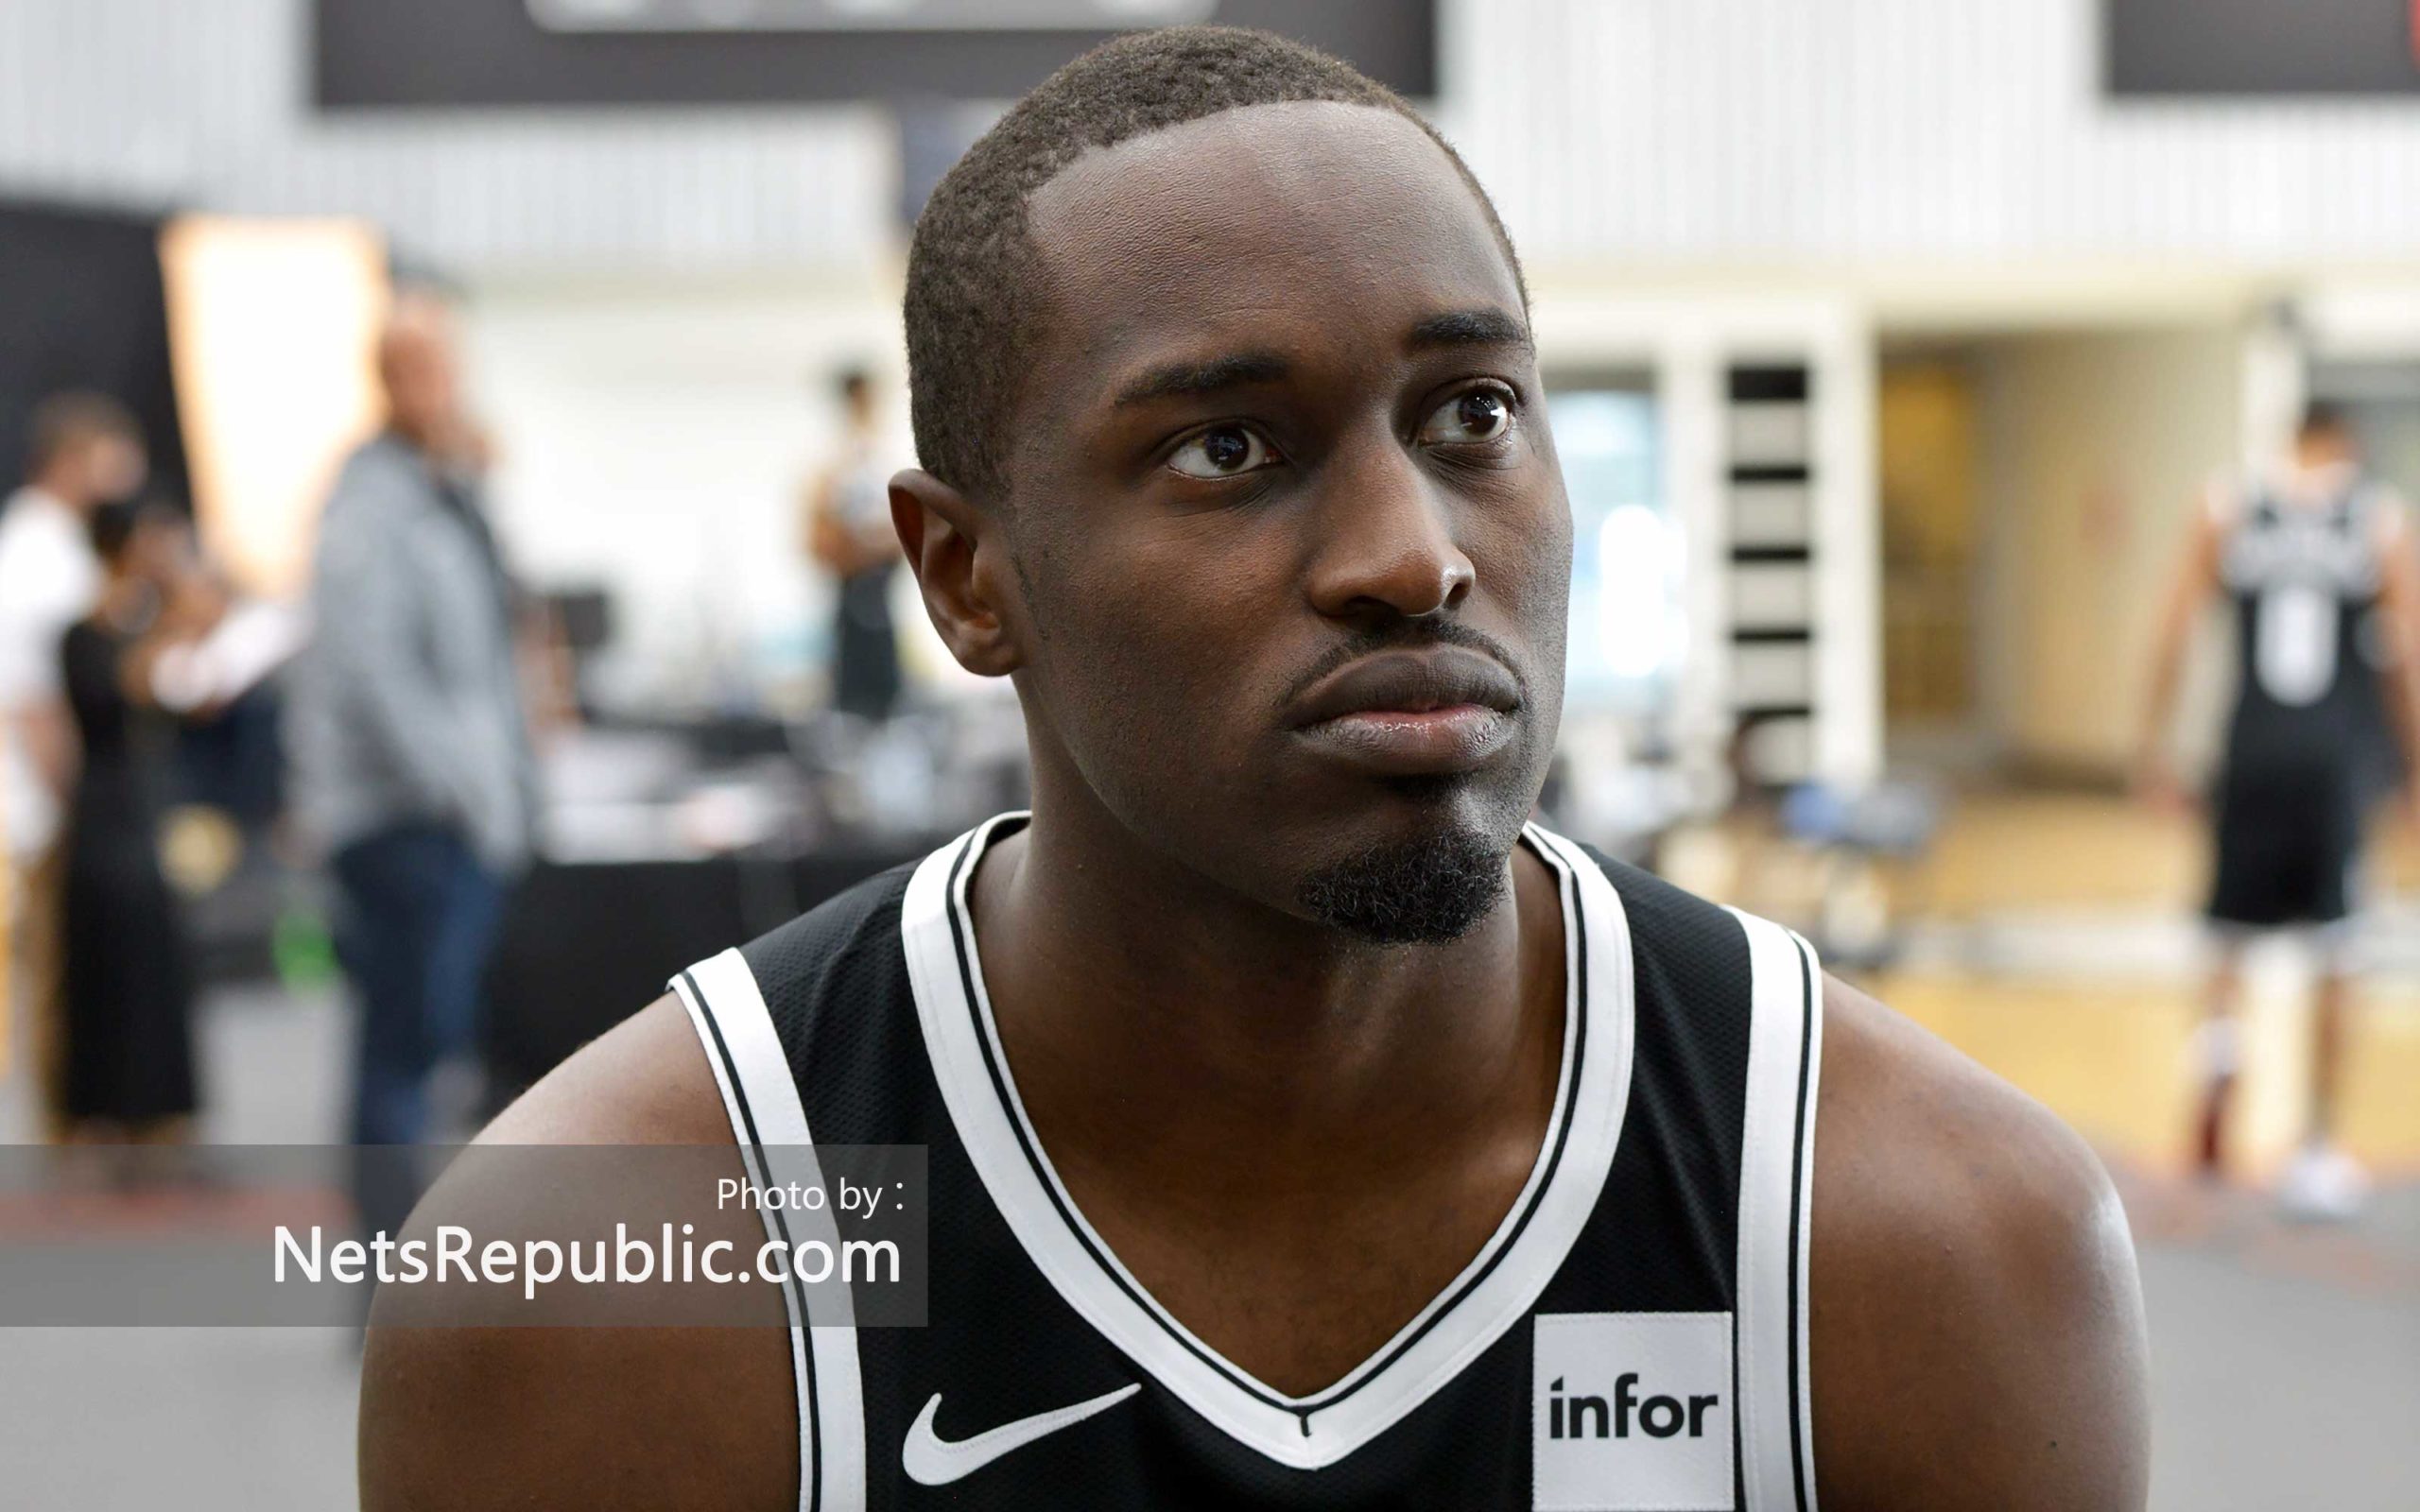 Who is Theo Pinson?